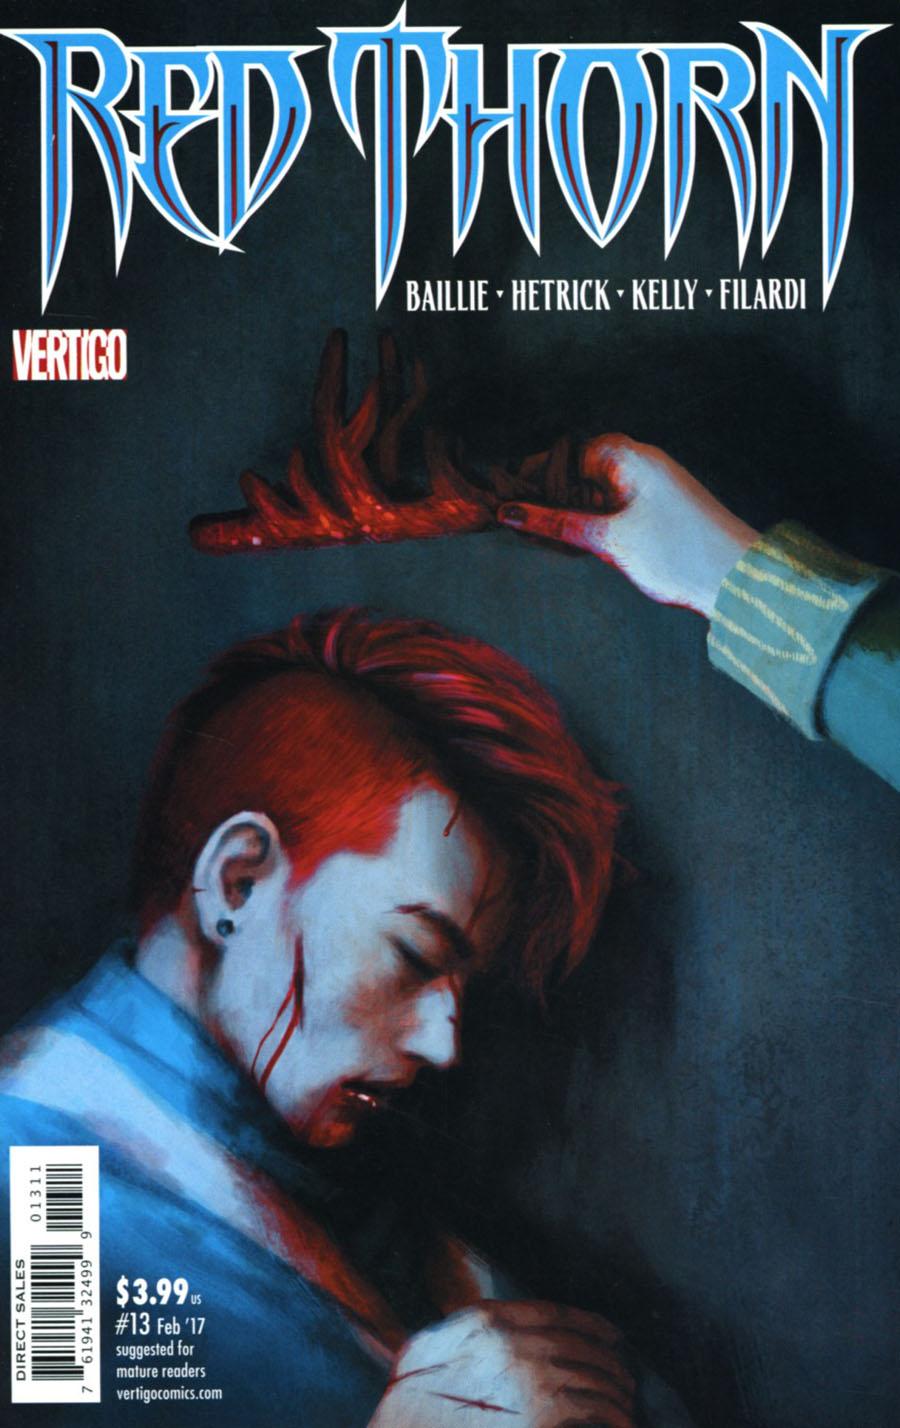 Red Thorn Vol. 1 #13